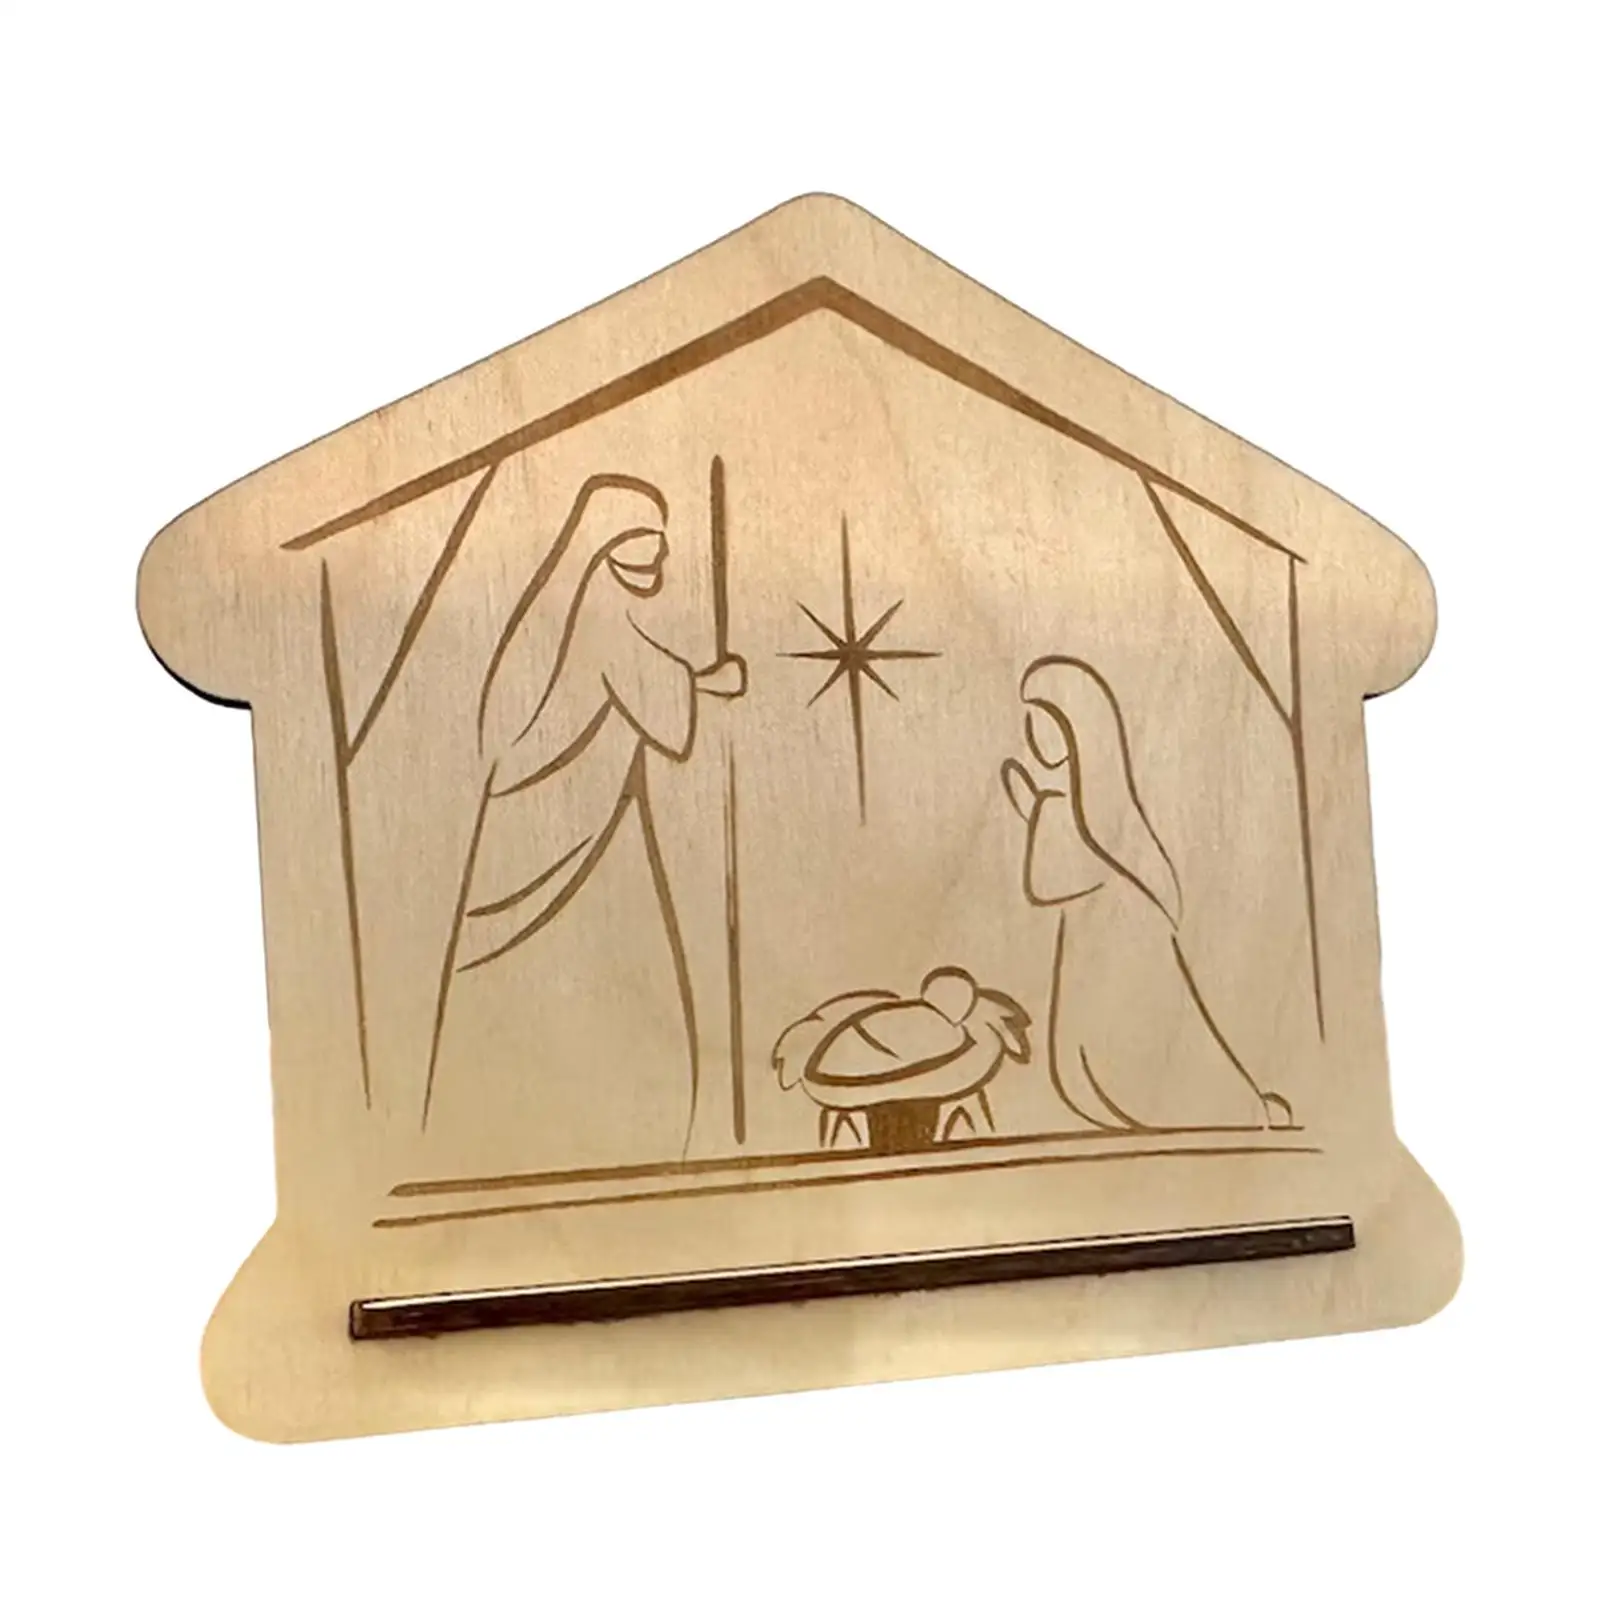 The Birth of Jesus Decorations Xmas Decor for Family Table Centerpiece Home